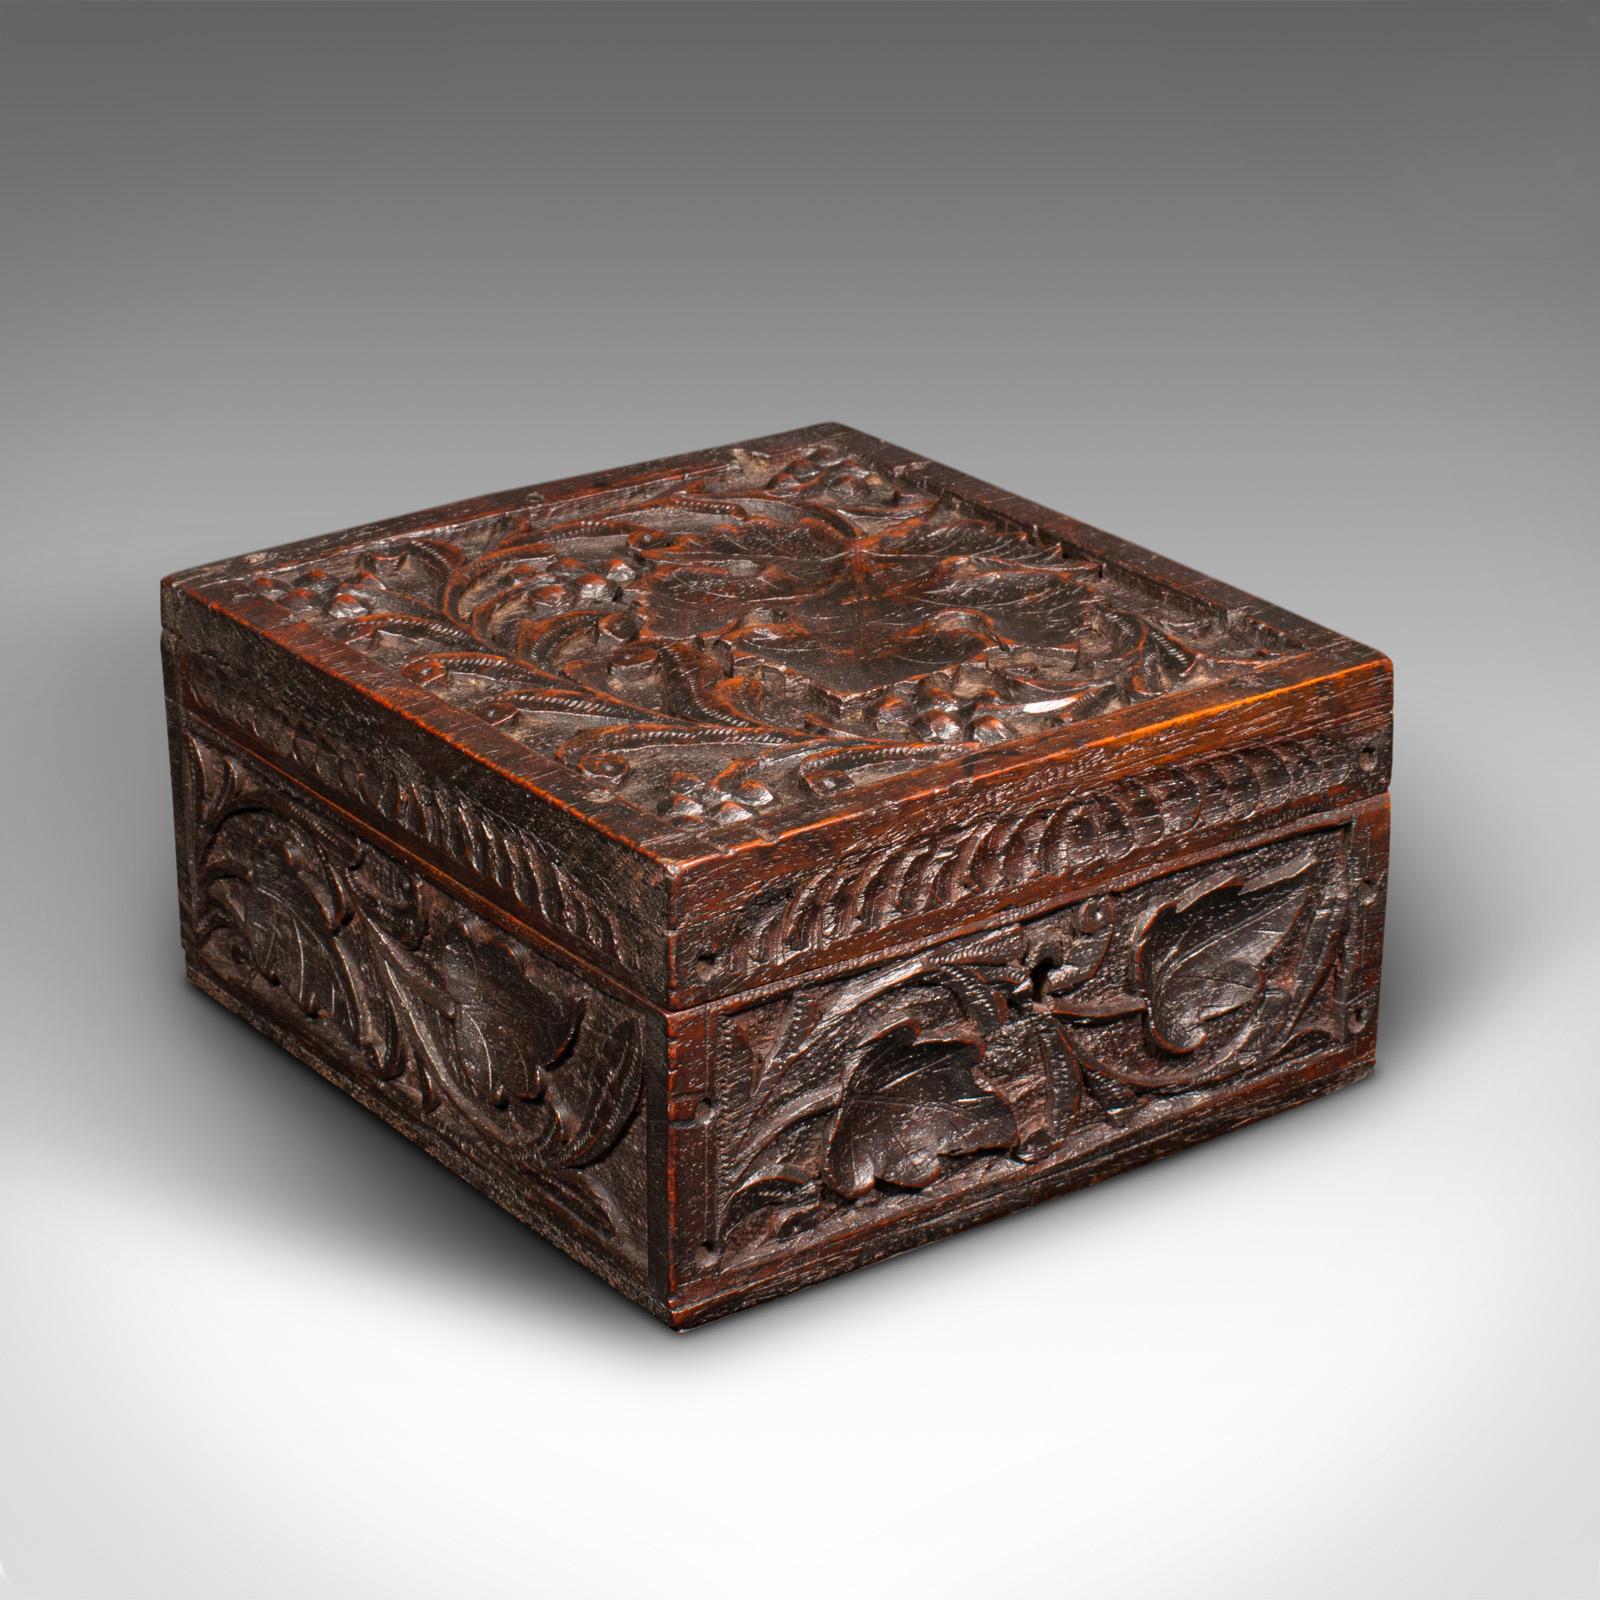 This is a small vintage keepsake box. An Indian, teak storage case with carved finish, dating to the late Art Deco period, circa 1940.

Petite and profusely carved box with appealing finish
Displays a desirable aged patina and in good original